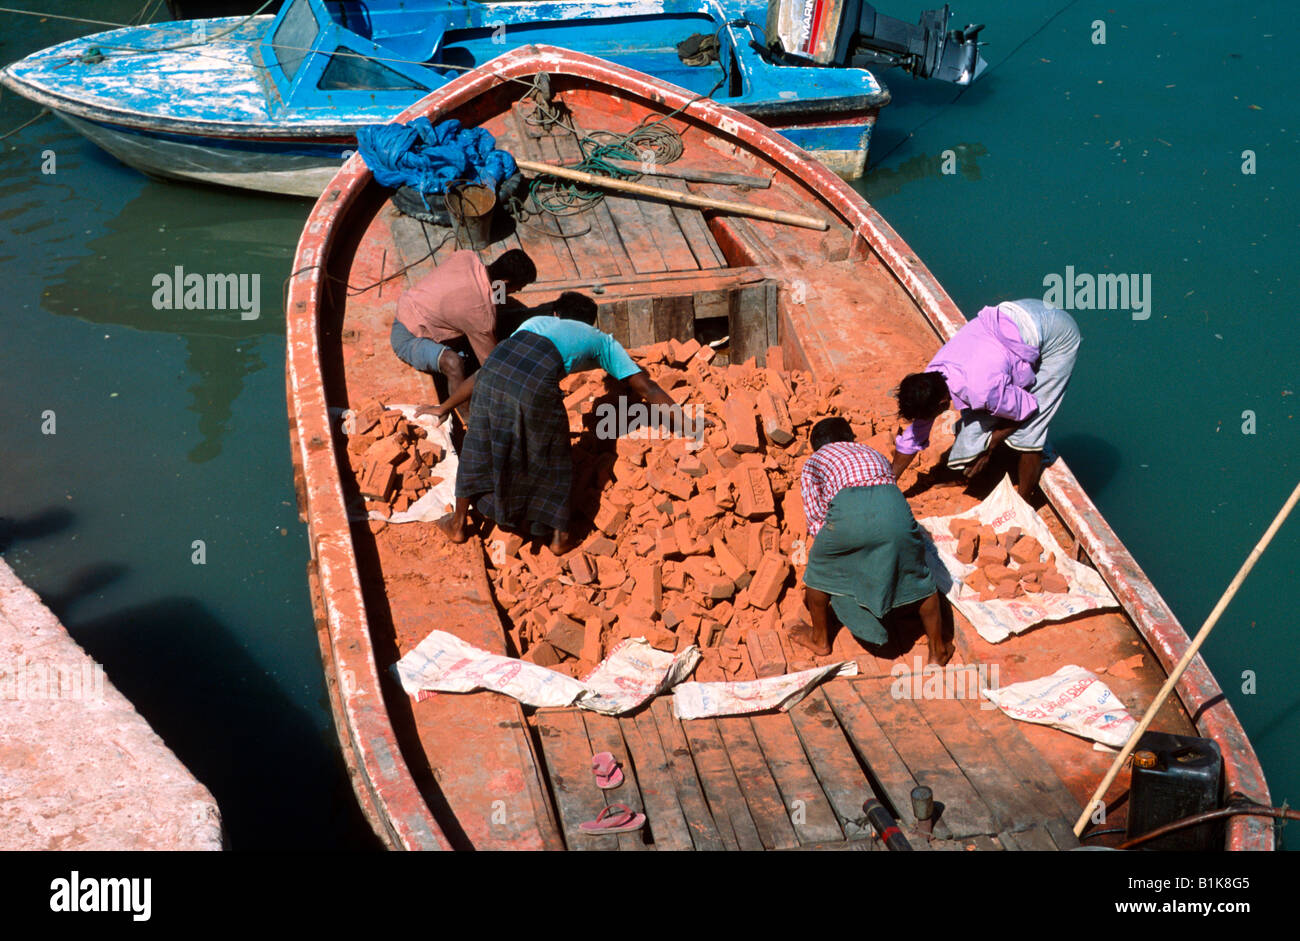 Workers sorting brick rubble transported in a boat Moheskhali island near Cox s Bazaar Bangladesh Stock Photo